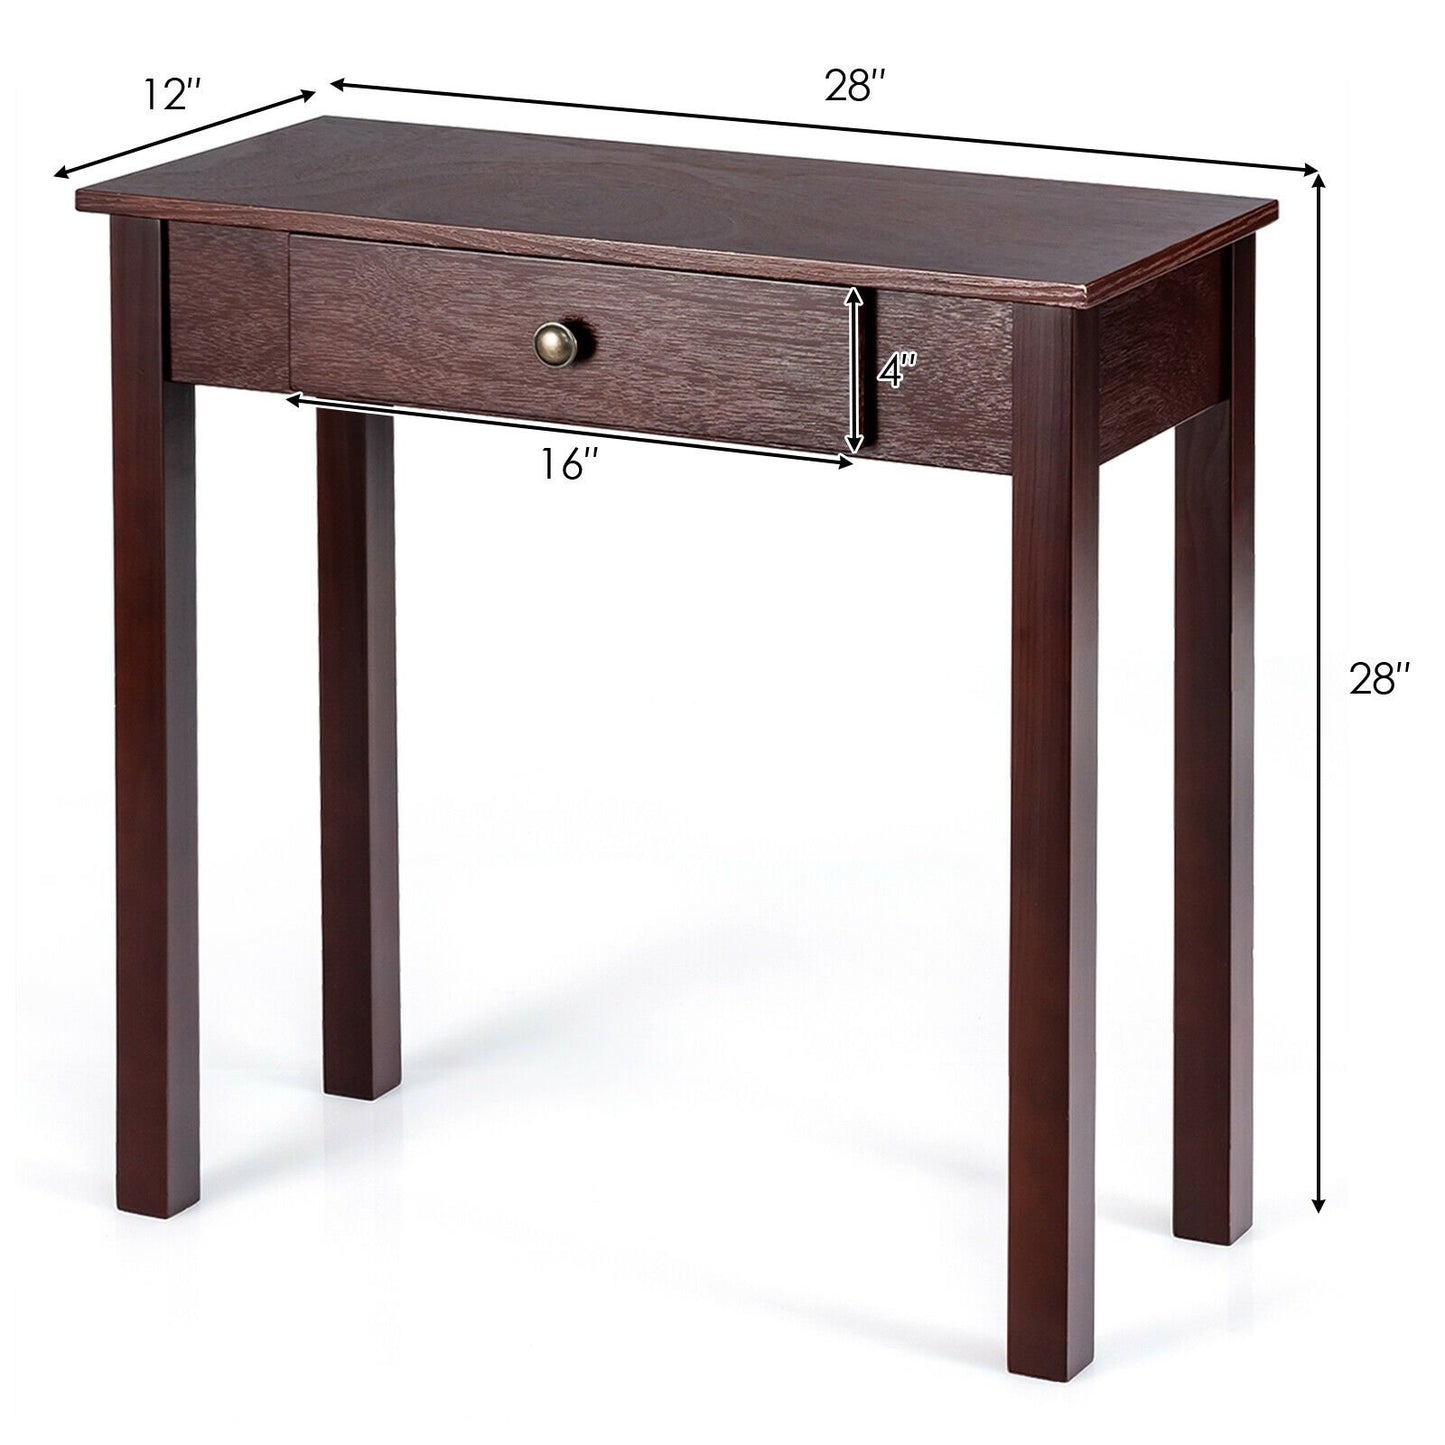 Small Space Console Table with Drawer for Living Room Bathroom Hallway, Dark Brown